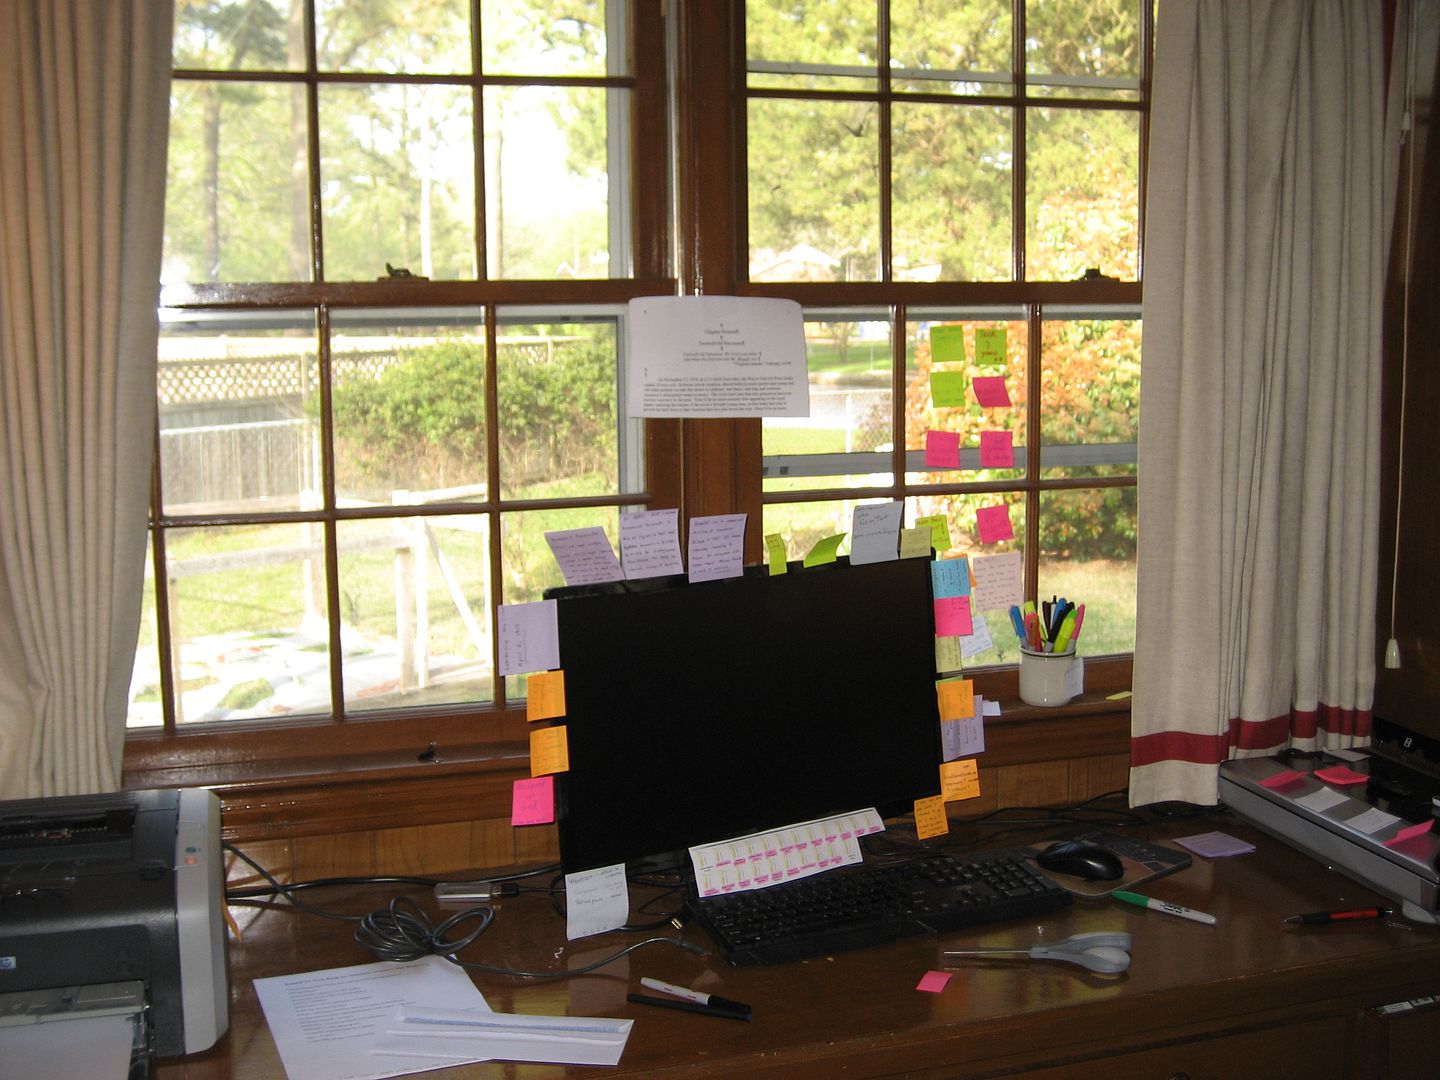 If there was a single word that could be used to describe this mess, it might be post-it notes.